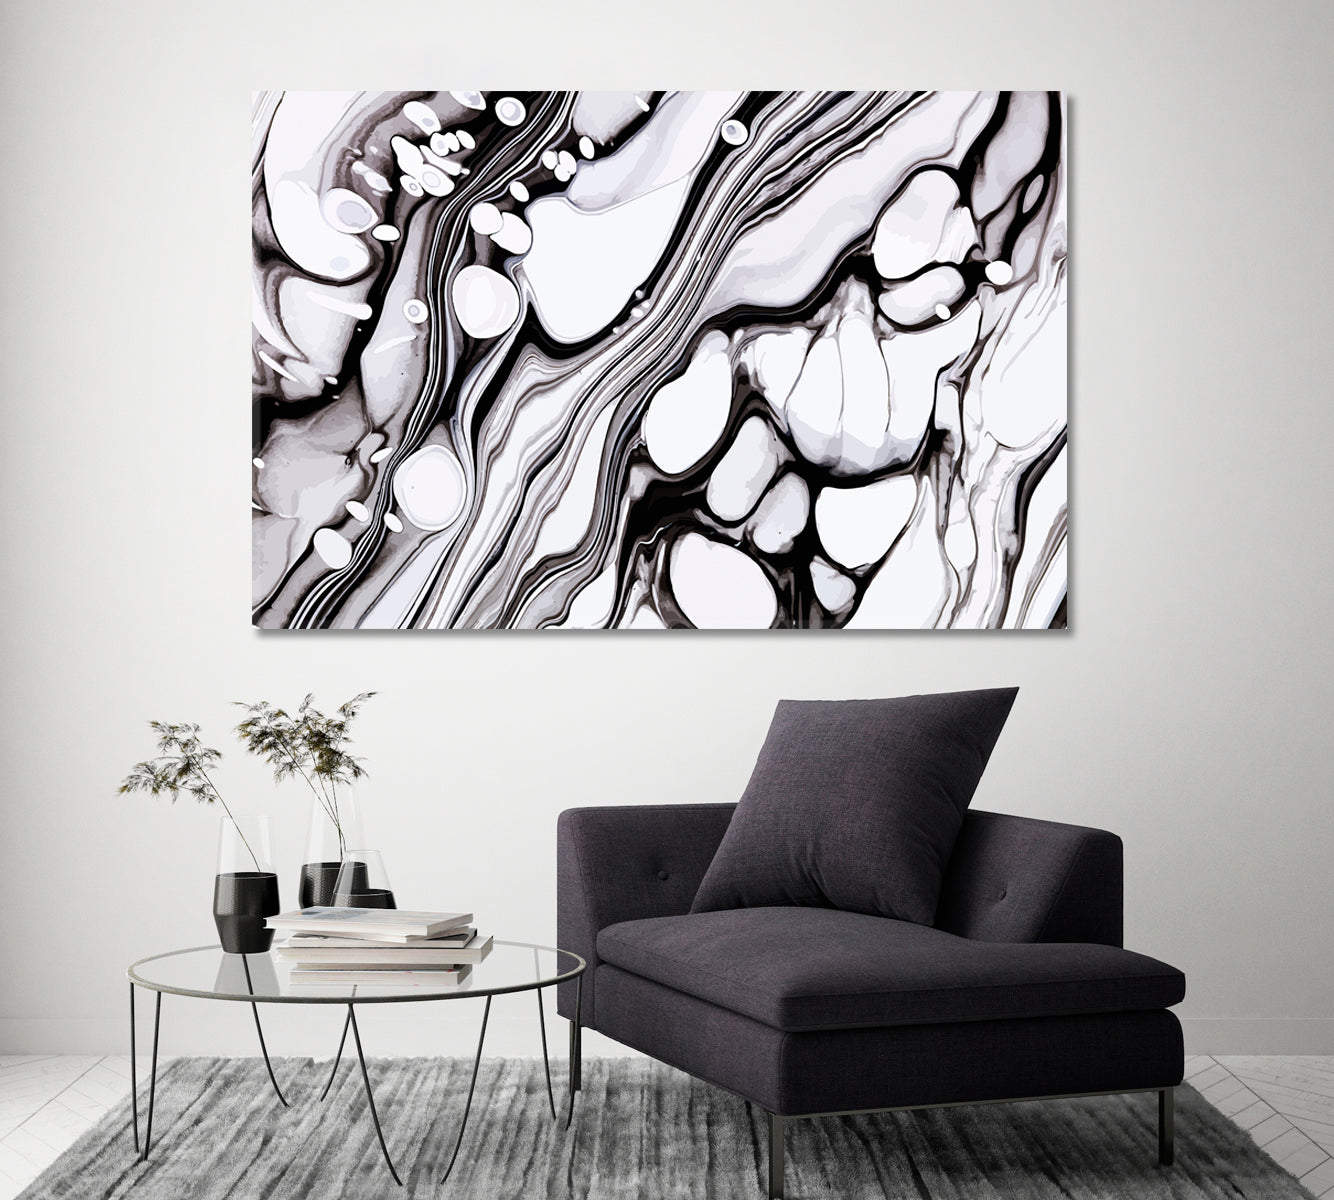 Abstract Black & White Fluid Marble Waves Canvas Print ArtLexy 1 Panel 24"x16" inches 